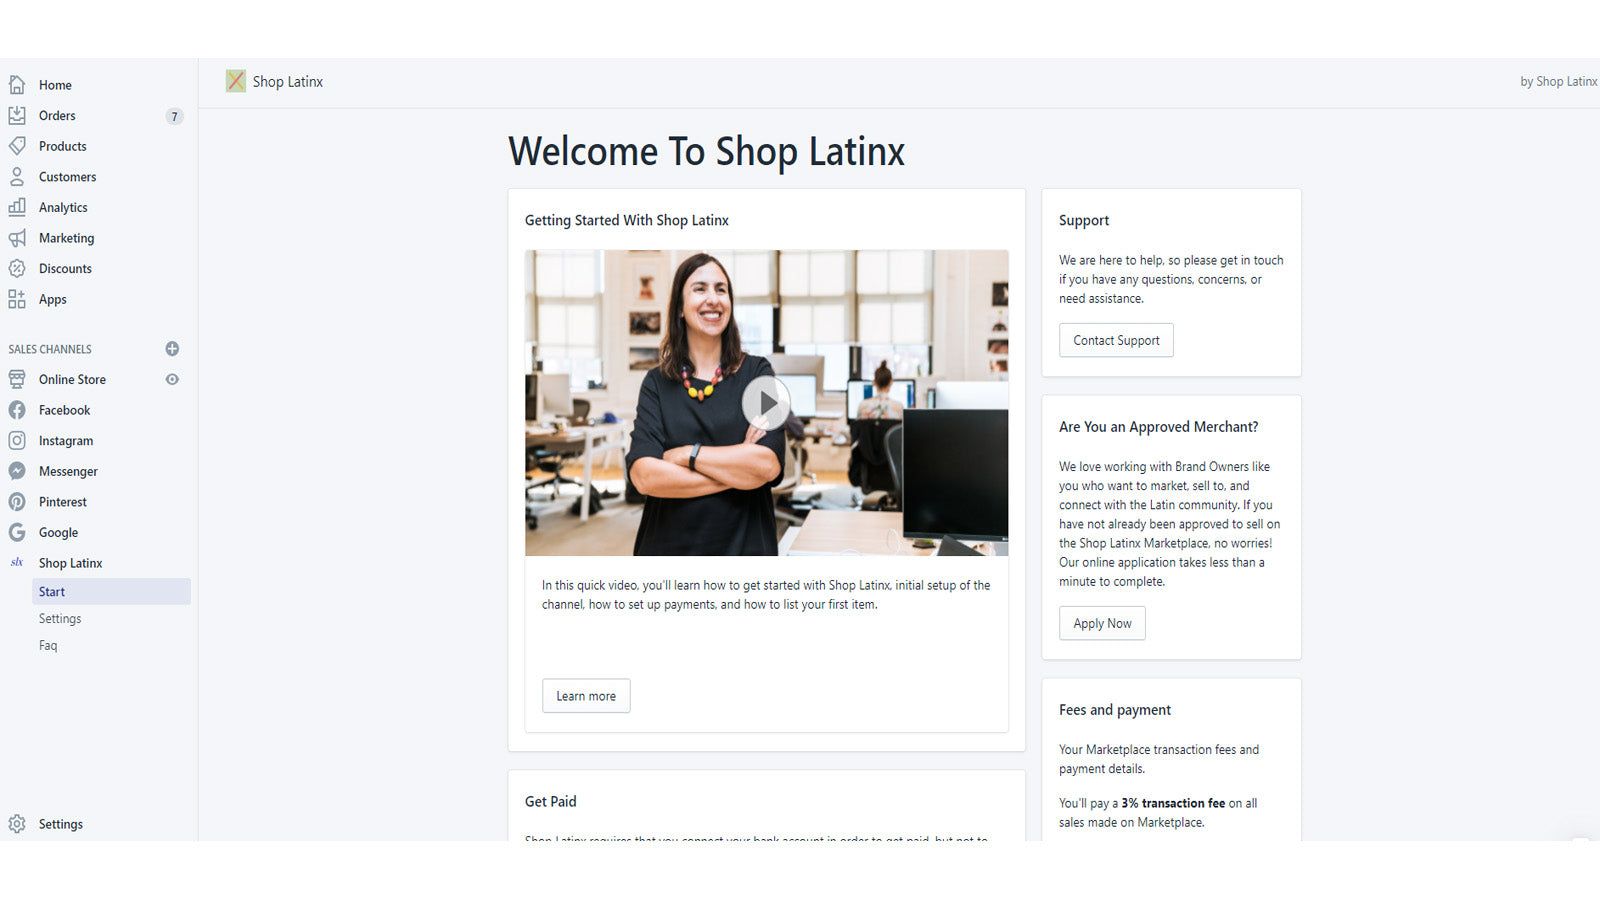 The start page of shoplatinx app